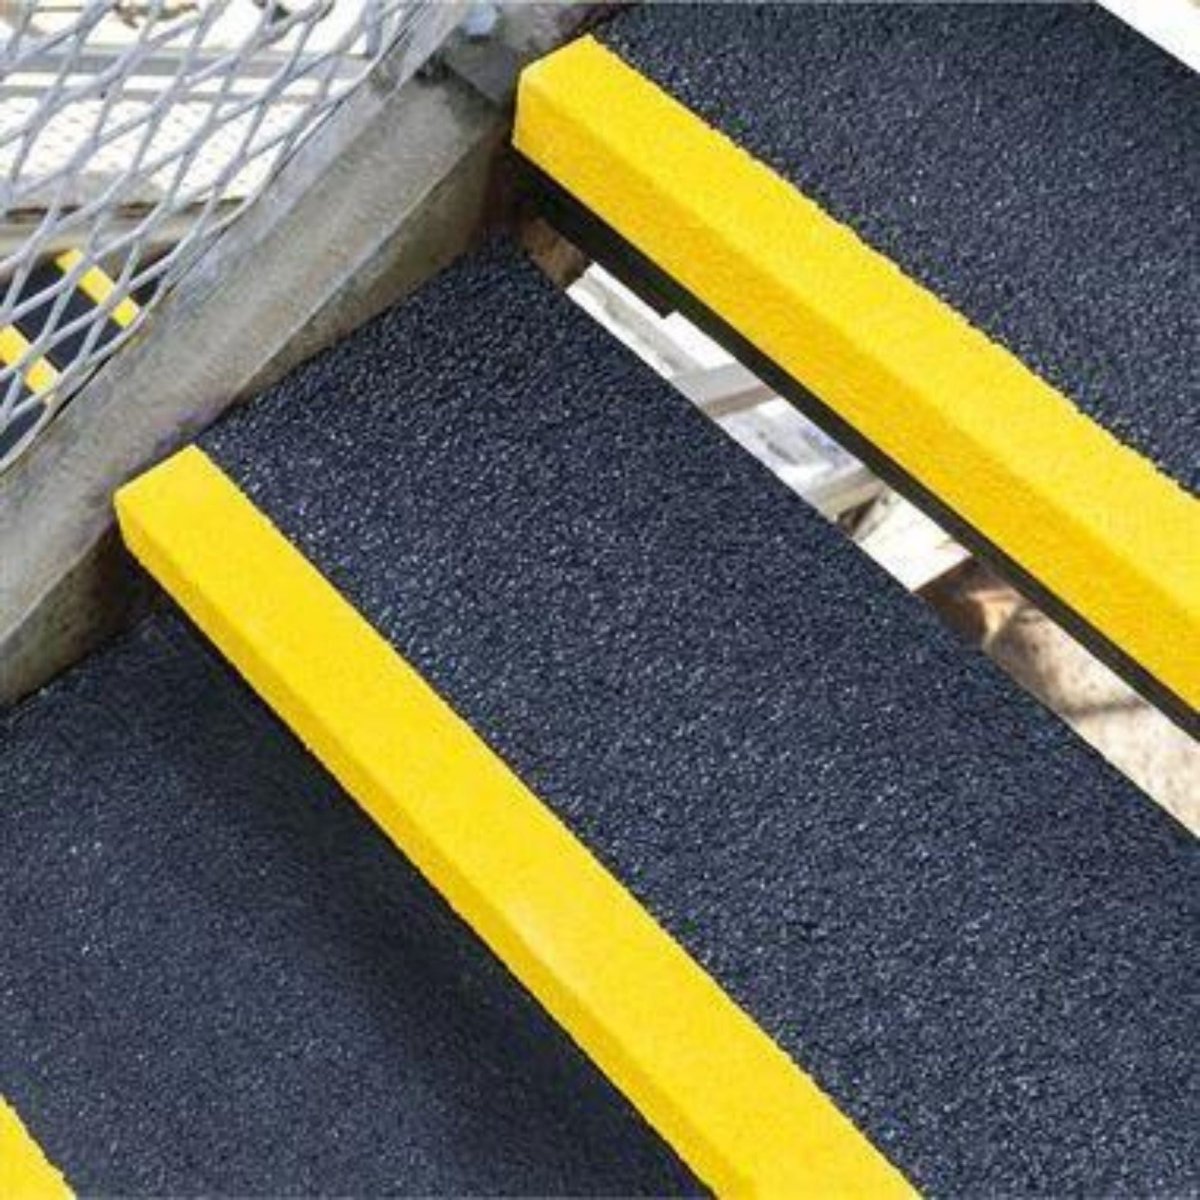 Stair Tread Nosing Covers - GRP Heavy Duty Anti Slip - Black & Yellow - Slips Away - Anti Slip Stair Tread Covers GRP 500mm x1 -